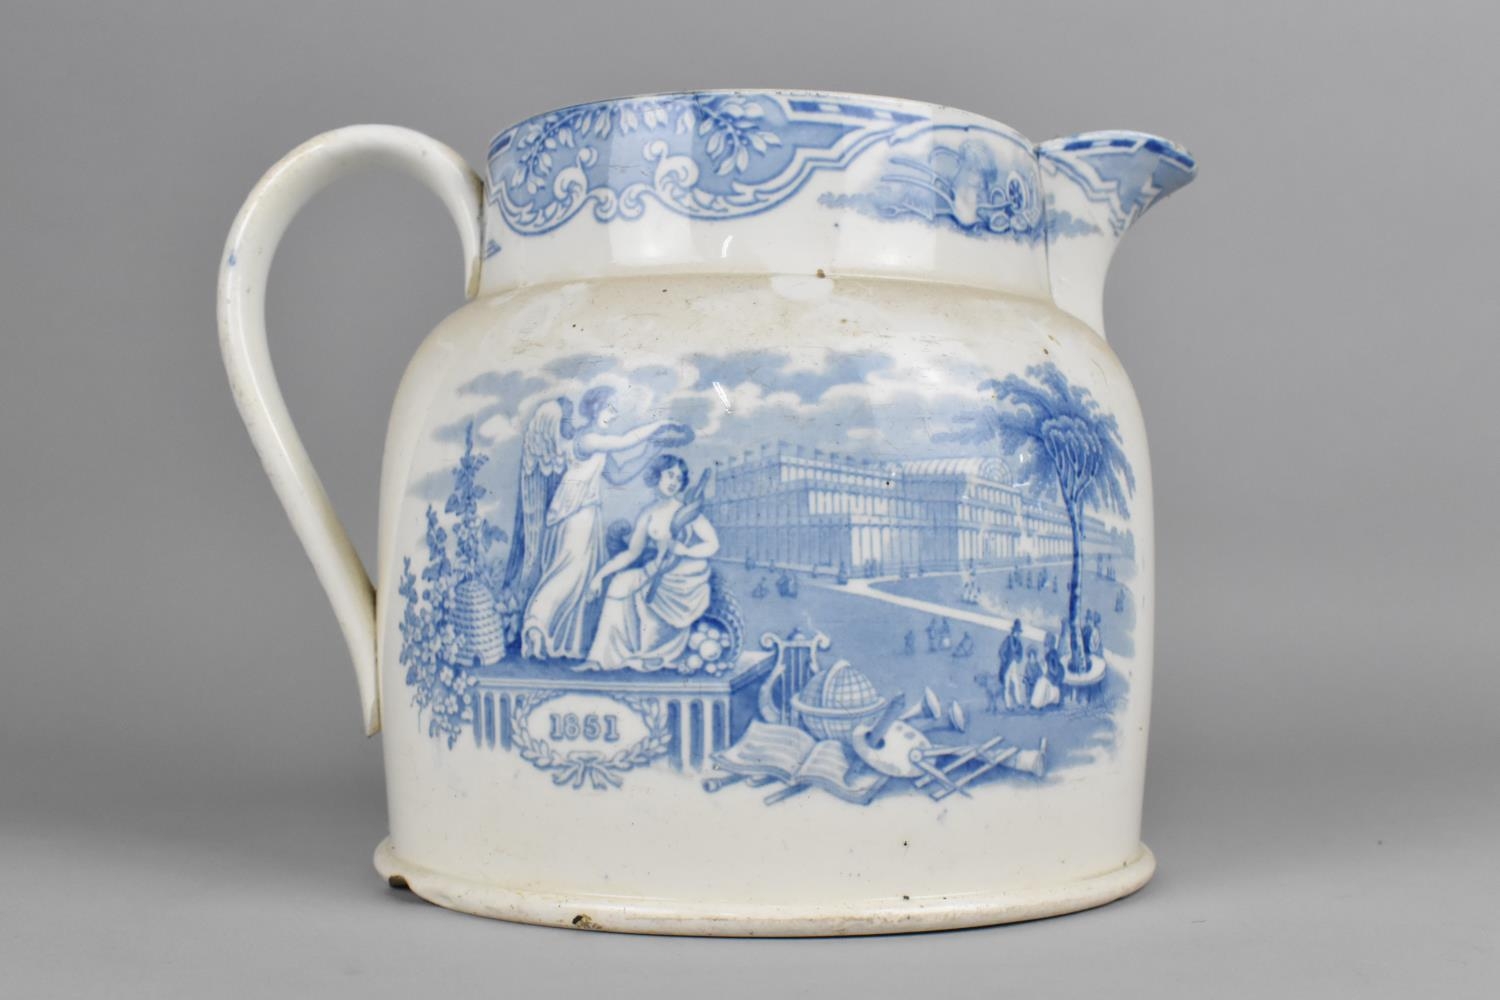 A Large Mid 19th Century English Blue and White Transfer Printed Jug with Crystal Palace Scene and